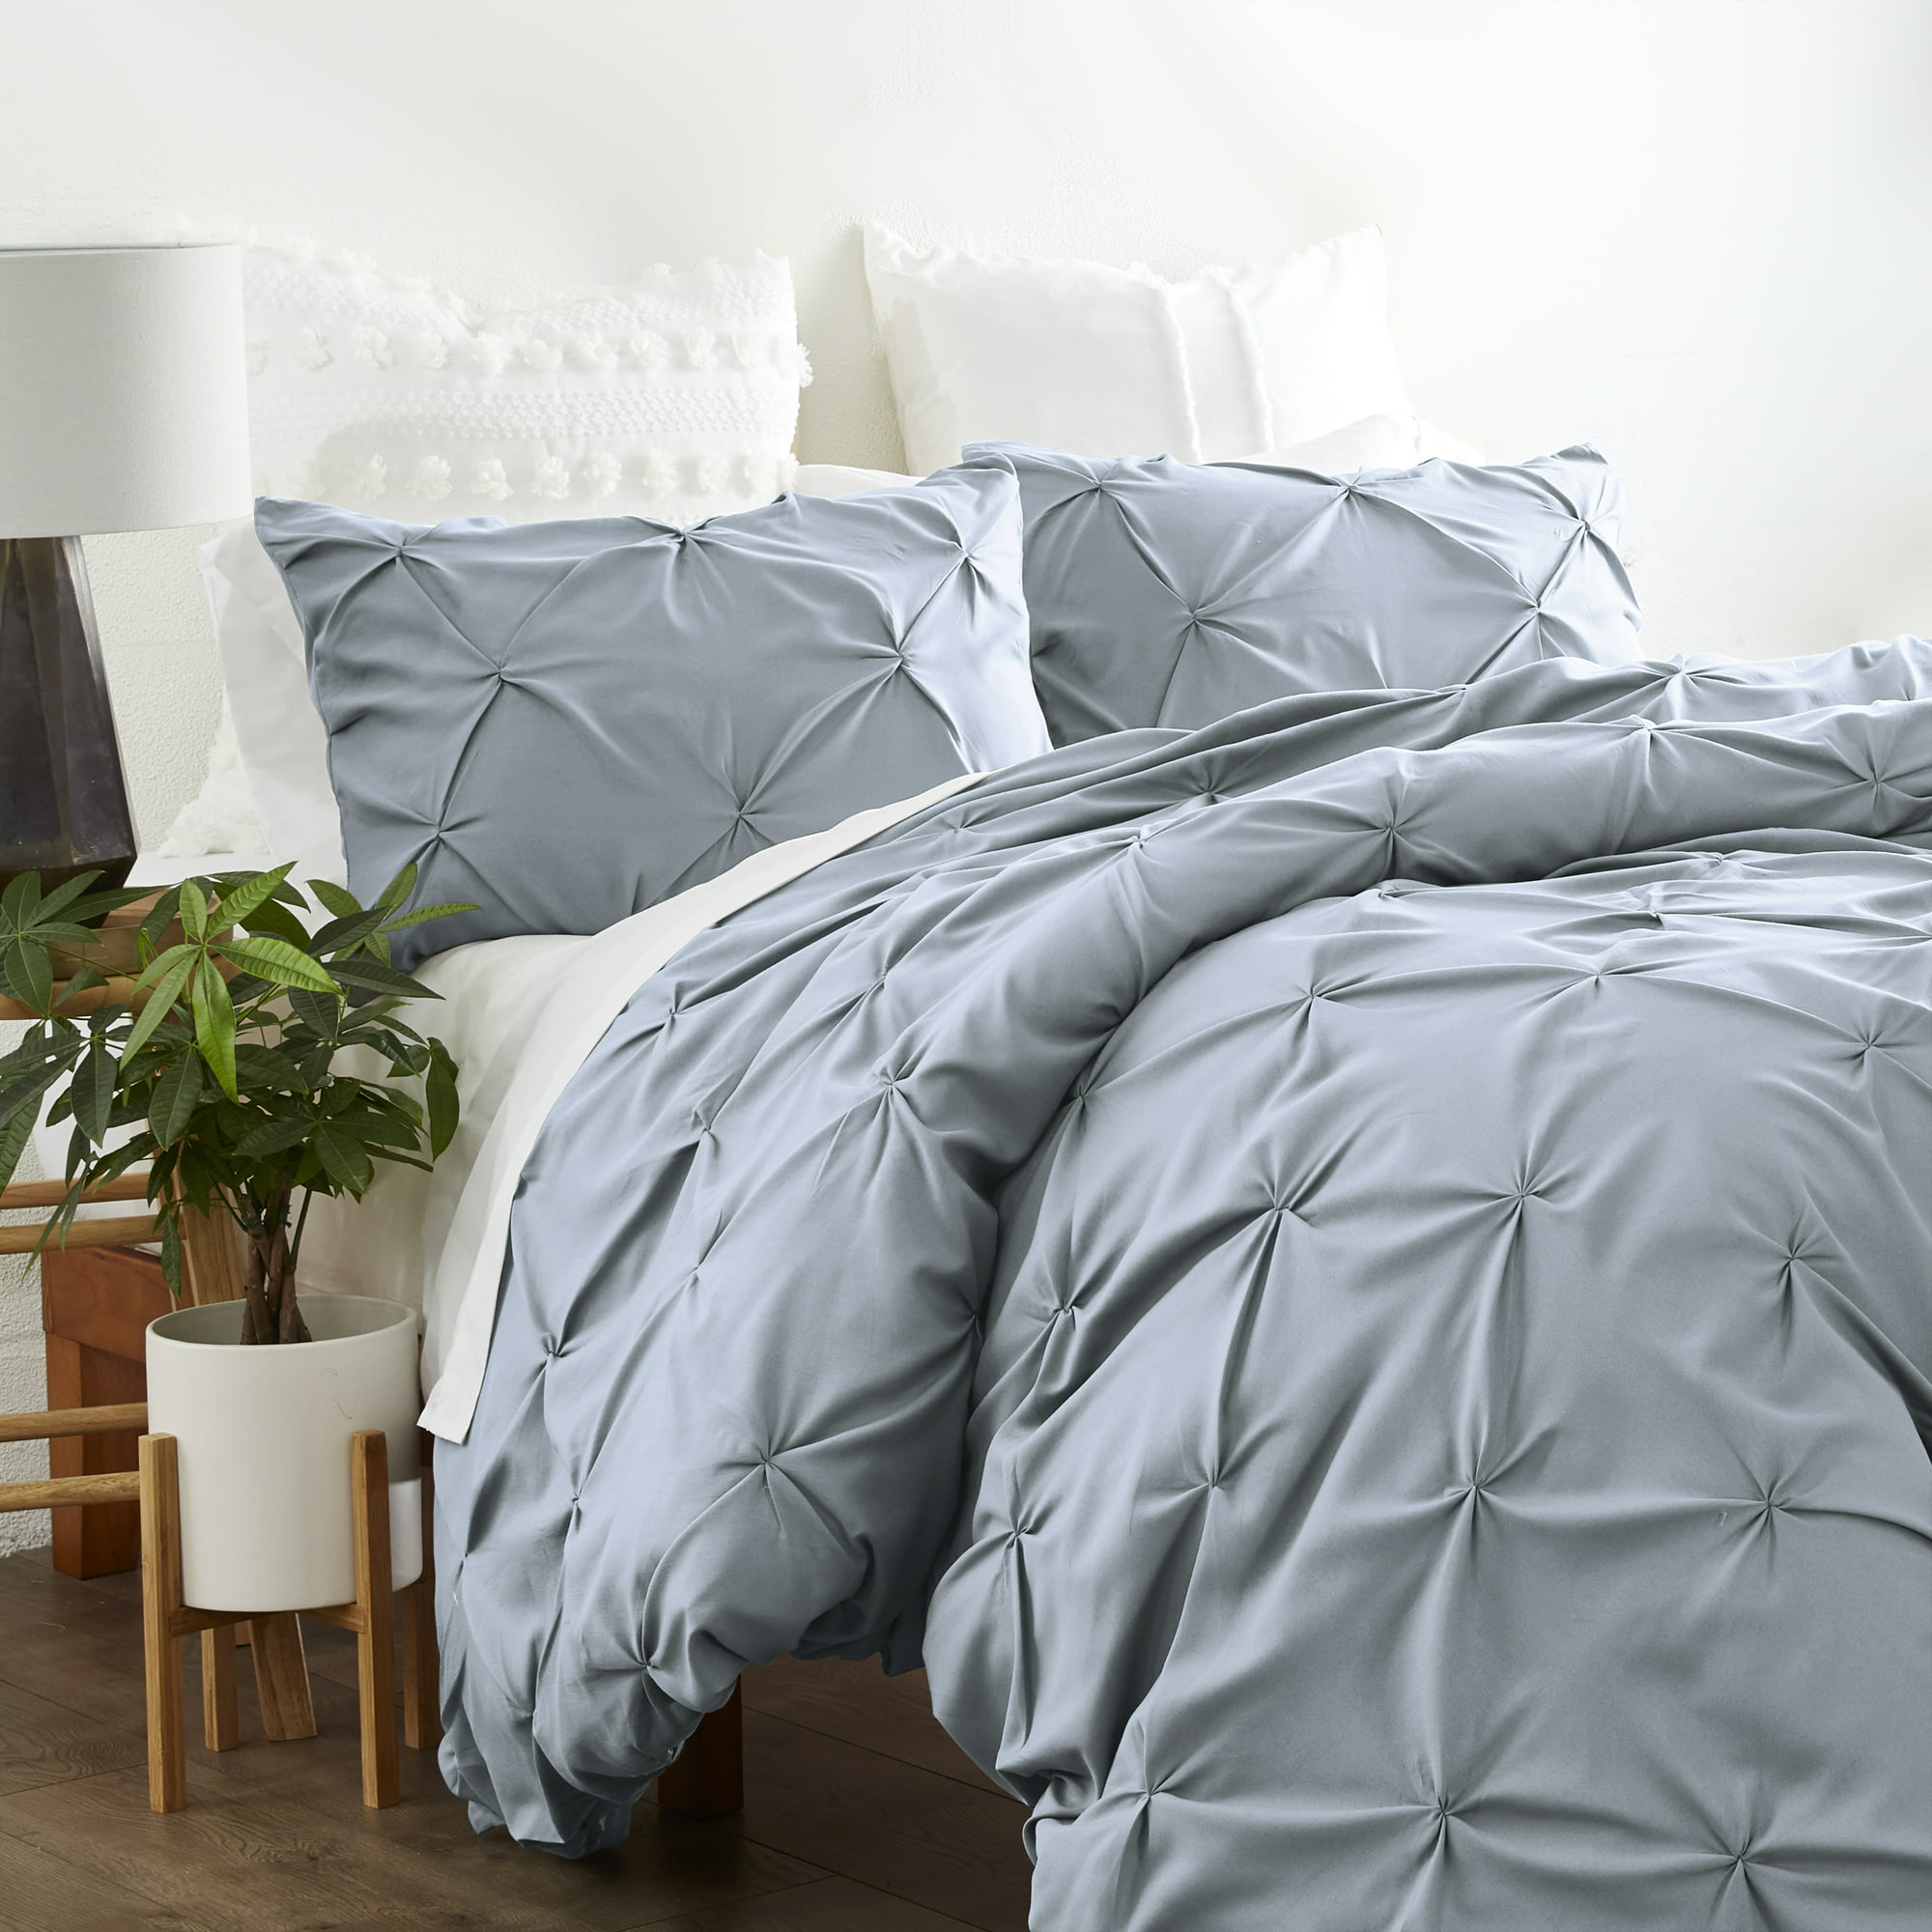 Home Collection Premium Ultra Soft 3 Piece Pinch Pleat Duvet Cover Set, King/California King - Light Blue